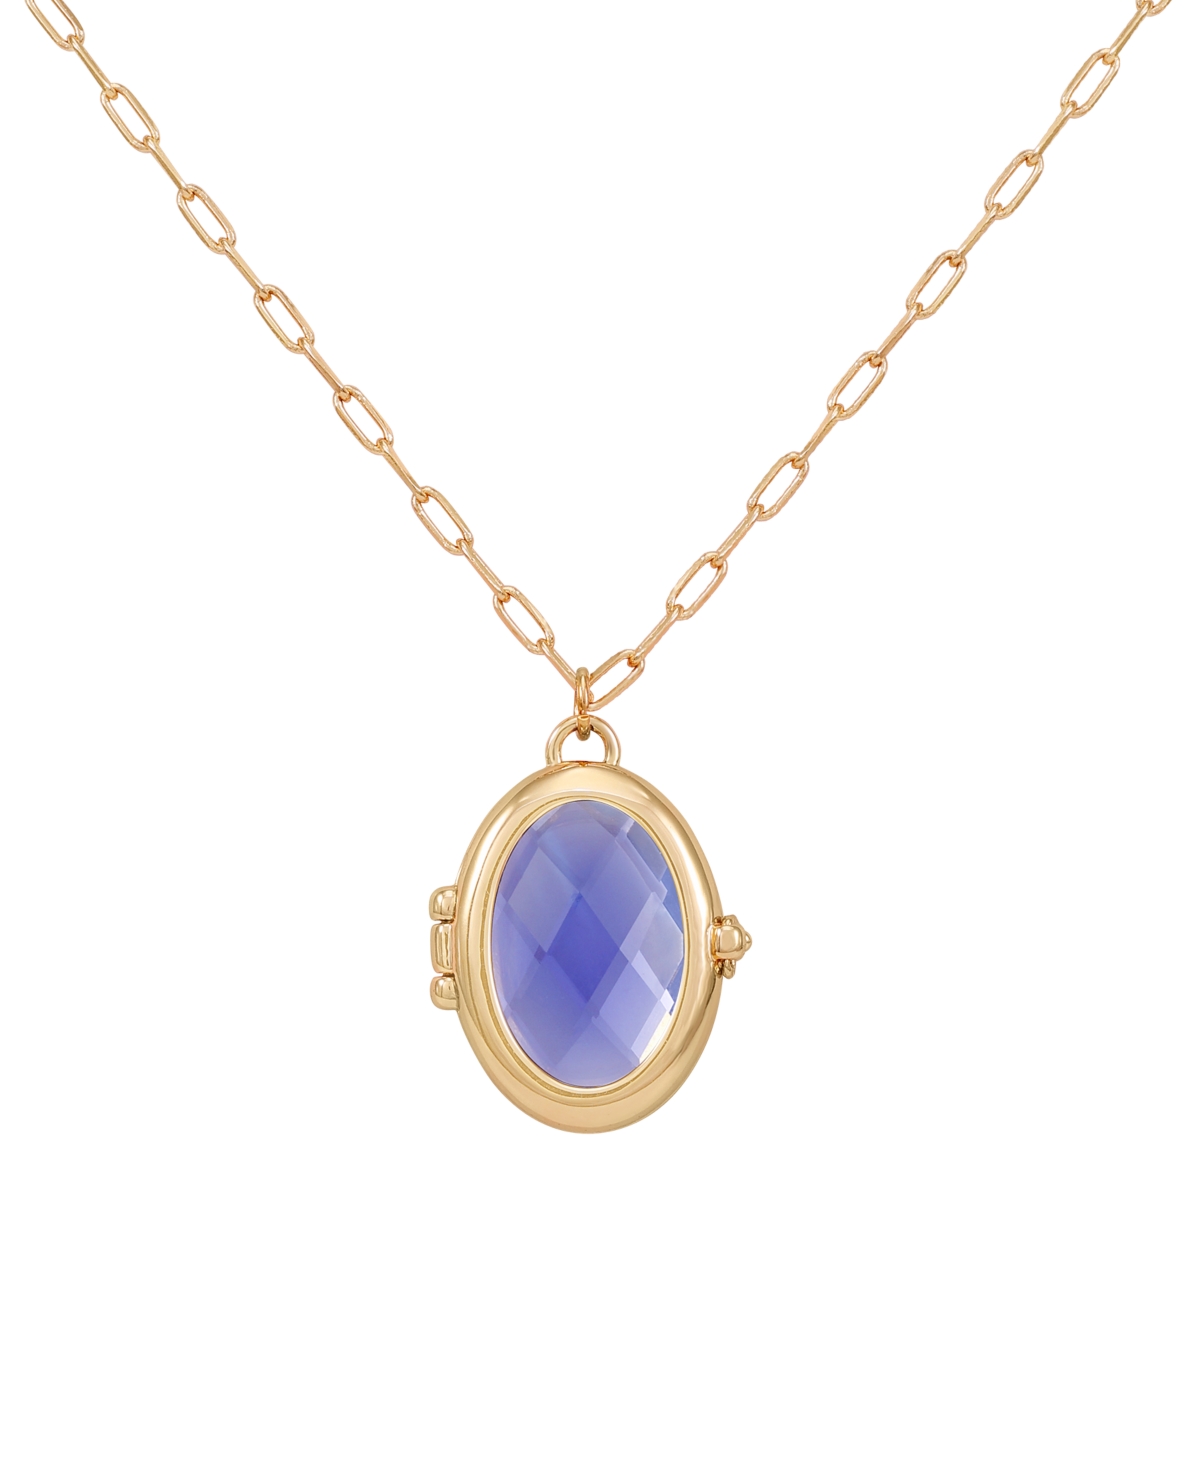 Guess Gold-tone Removable Stone Oval Locket Pendant Necklace, 18" + 3" Extender In Gold,alexandrite